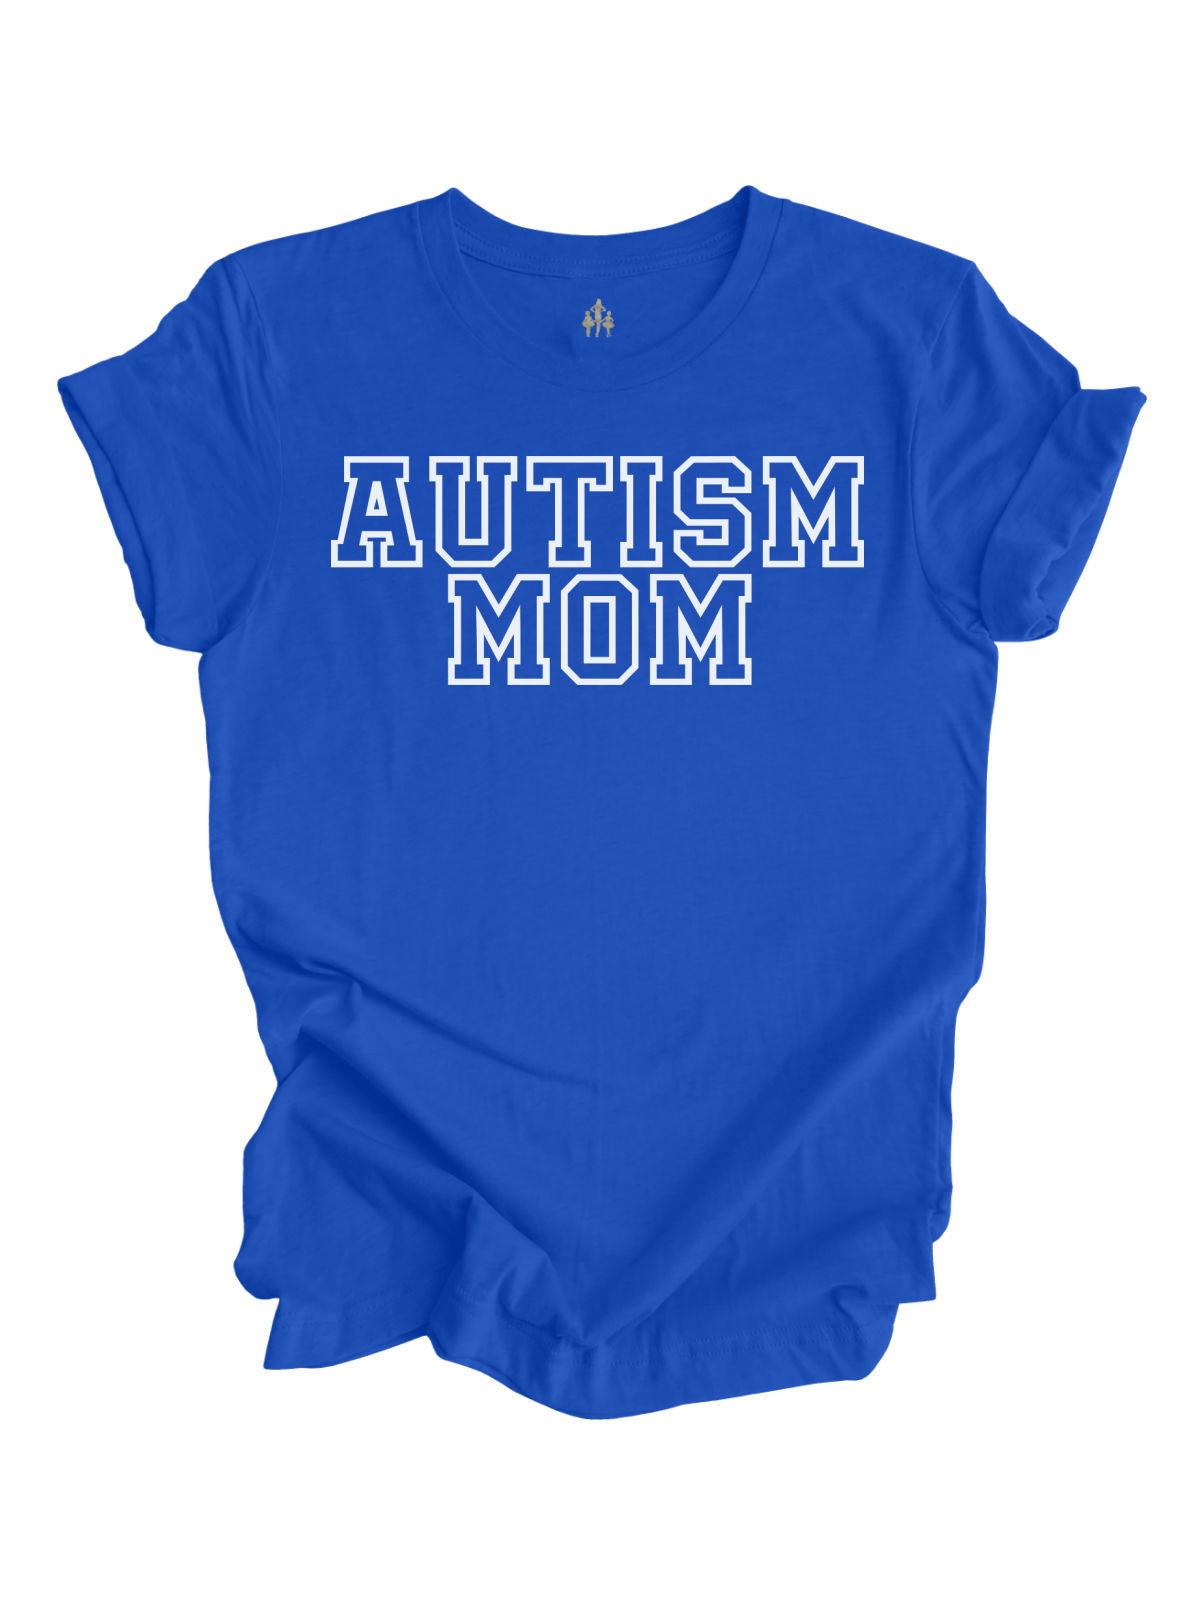 Autism Mom Shirt in Blue